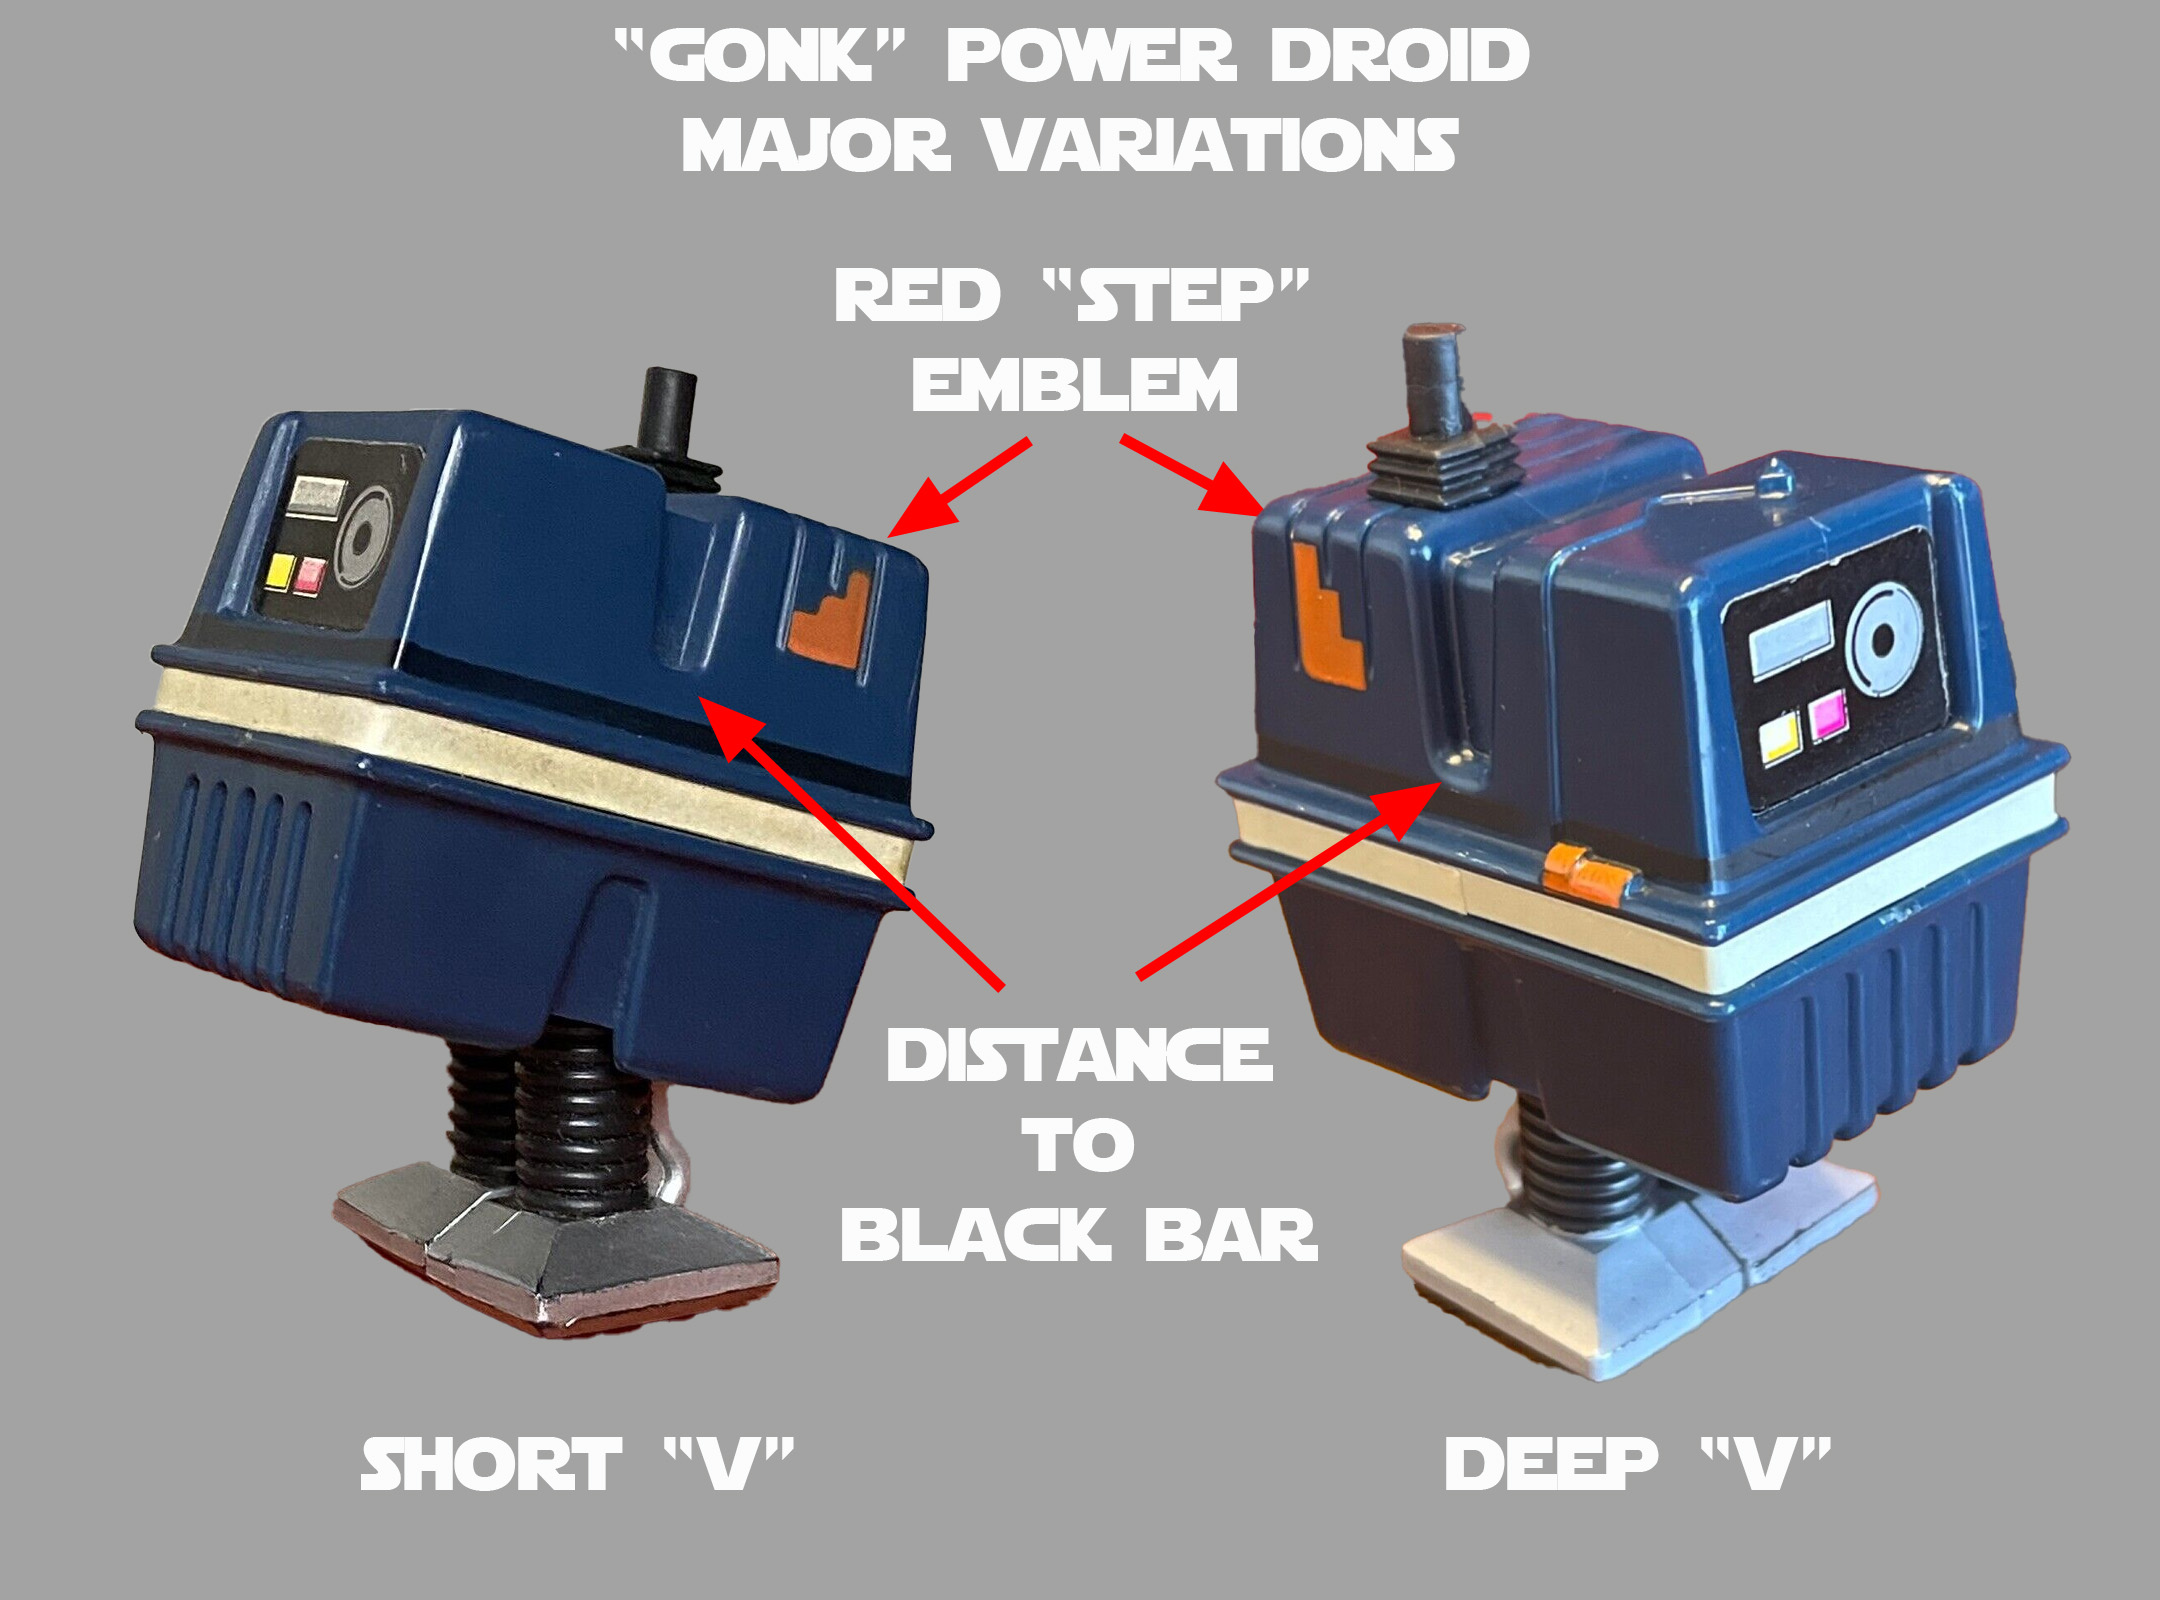 What's the difference between a Short V and a Deep V vintage Star Wars Power Droid action figure? Look for the details on the side of the droid and how close the indentation comes to the black bar.